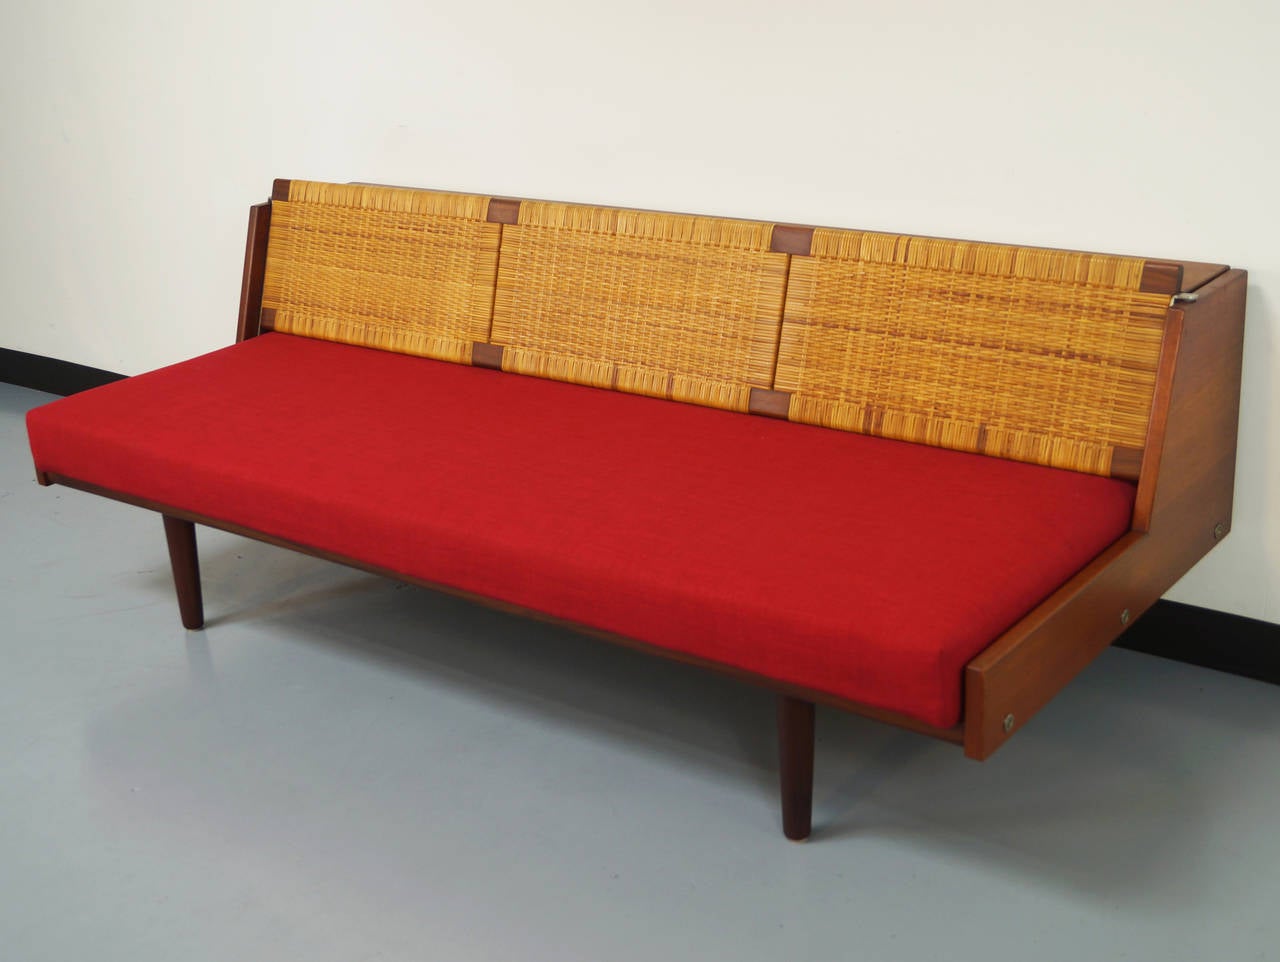 Danish teak sofa or daybed designed by Hans Wegner for GETAMA. Features a teak frame with a cane backrest that lifts up and locks in place to expose a twin bed. Cushion contains original coil springs. Engraved with original designer label.